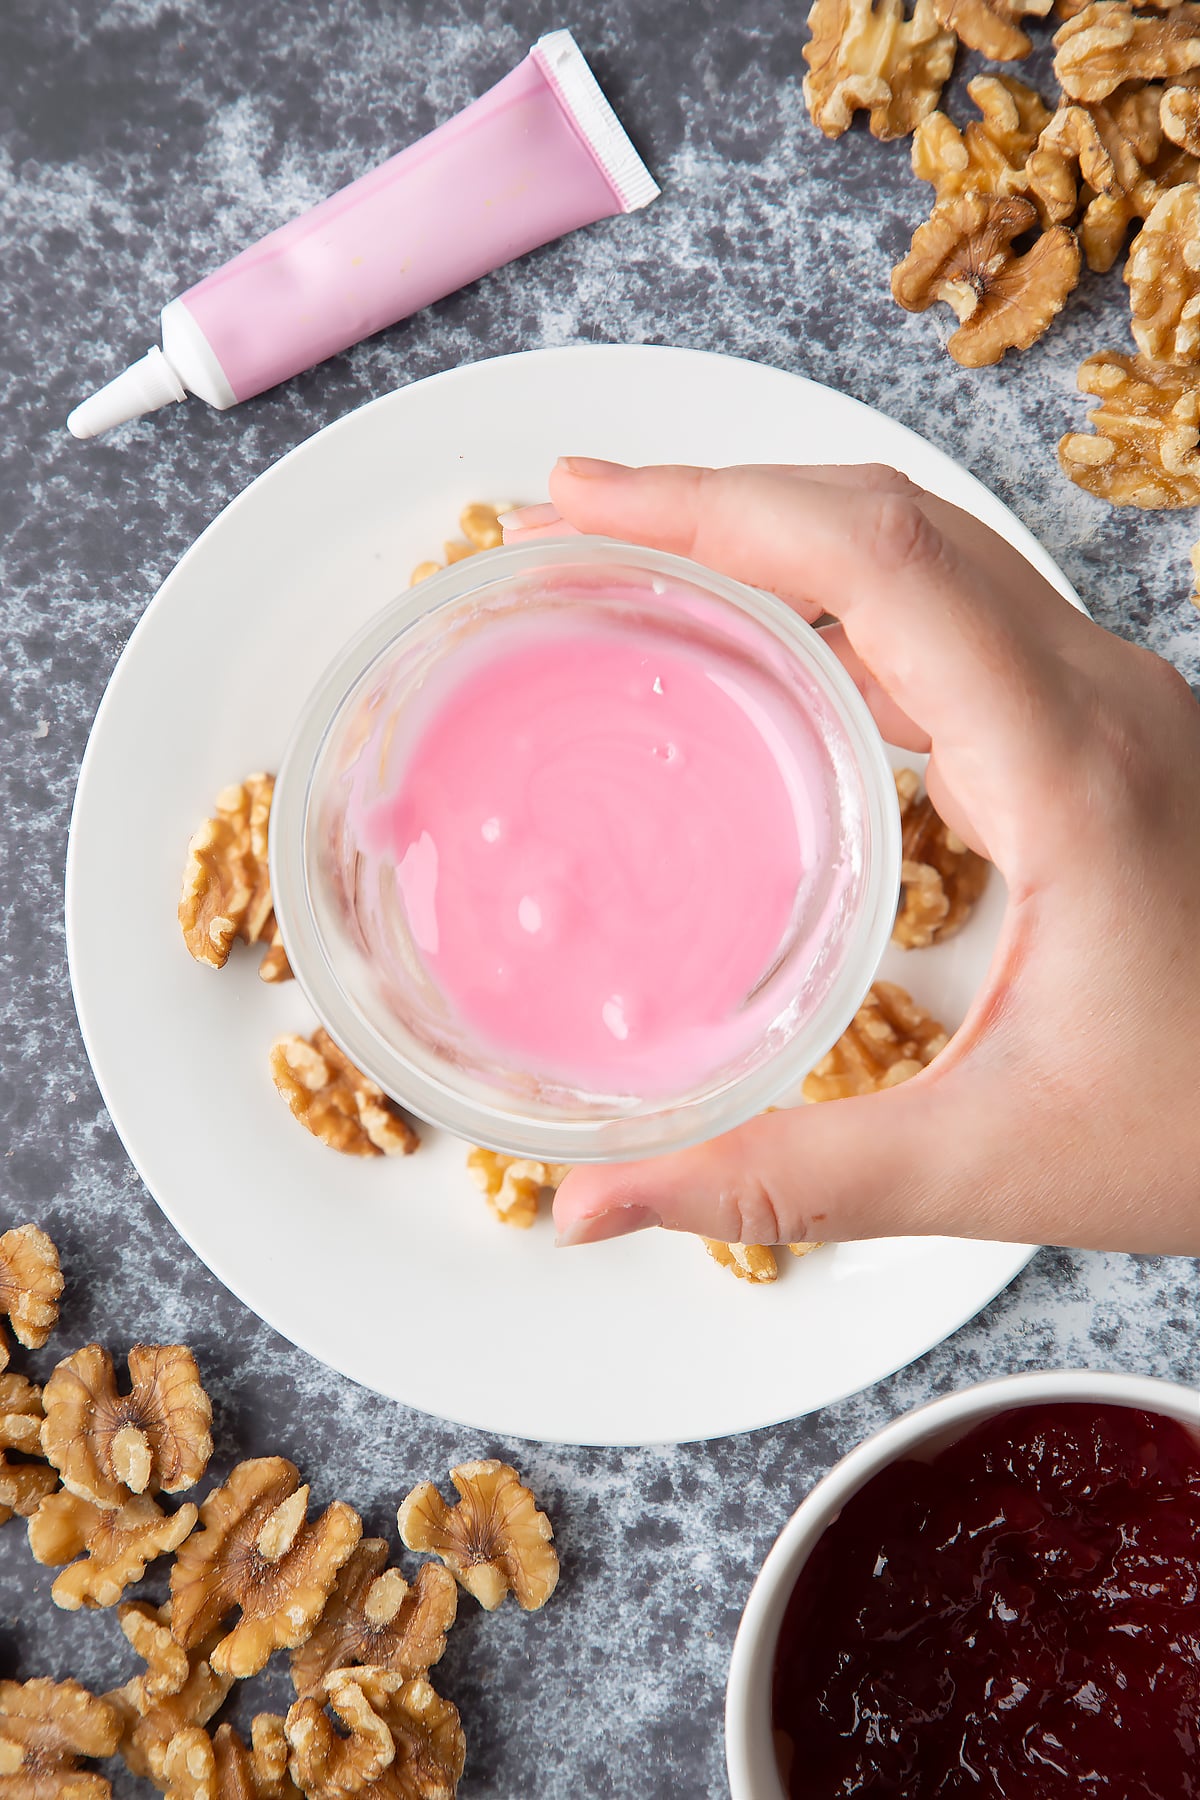 Walnuts on a white plate. Above, a hand holds a bowl containing pink icing. Ingredients to make gory Halloween cupcakes surround them.